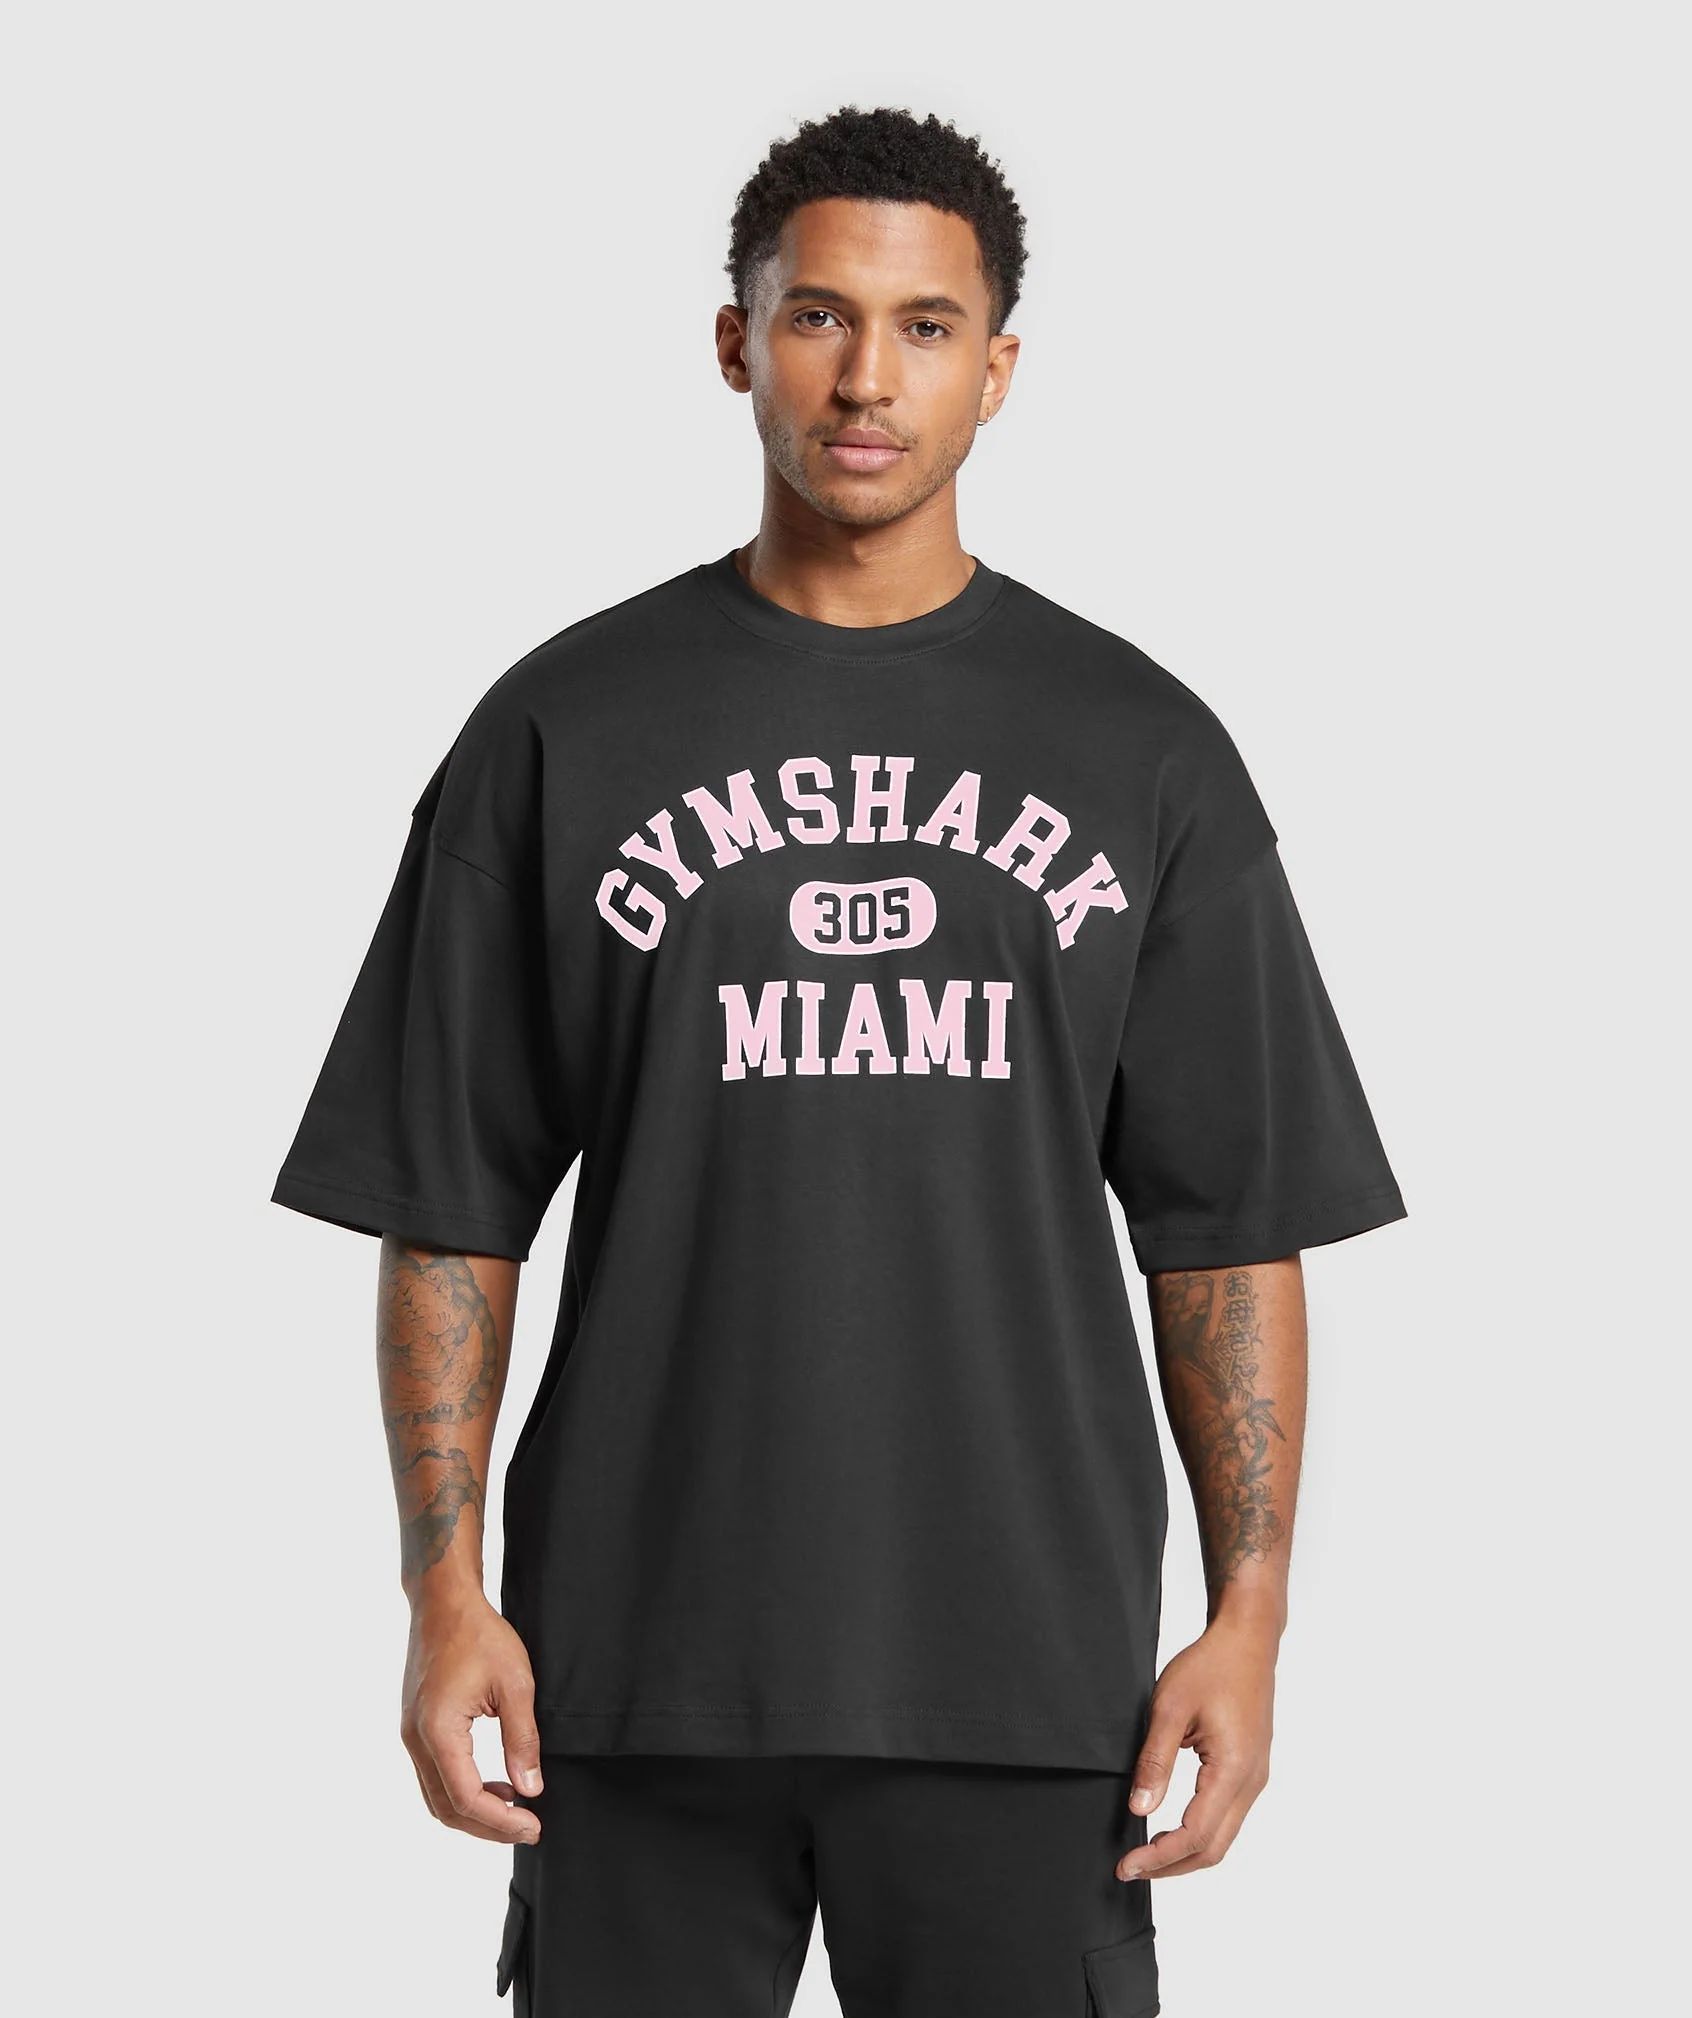 Gymshark Miami Graphic T-Shirt - Black/Dolly Pink | Gymshark US